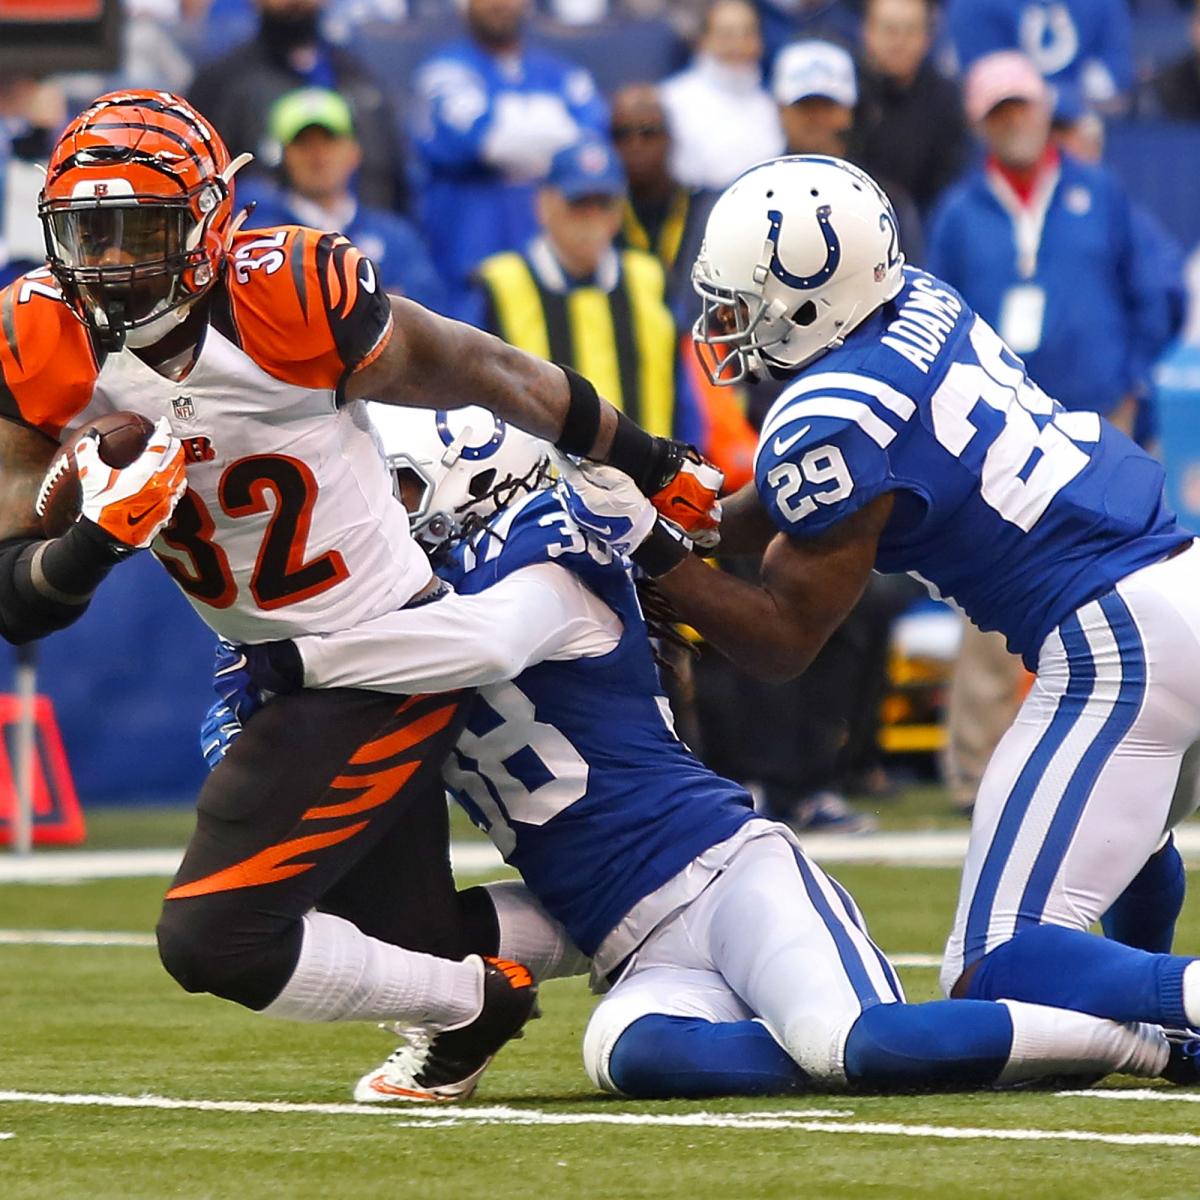 Bengals vs. Colts Complete Wild Card Game Preview for Cincinnati